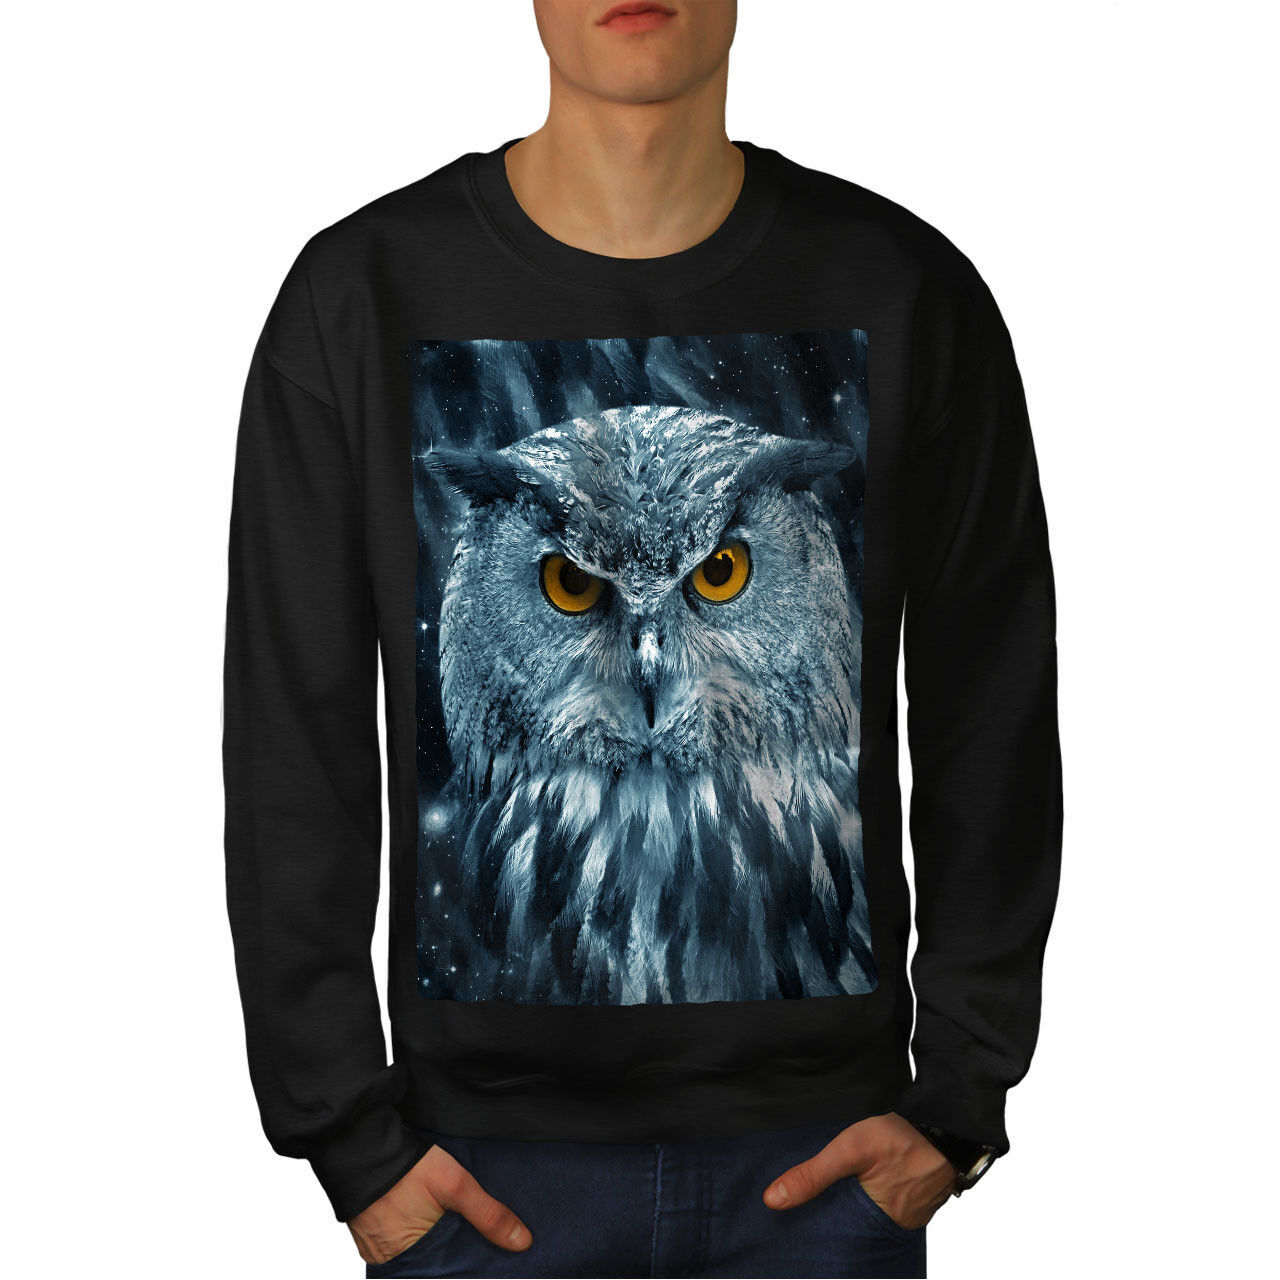 Primary image for Wellcoda Wild Looking Owl Mens Sweatshirt, Mother Casual Pullover Jumper